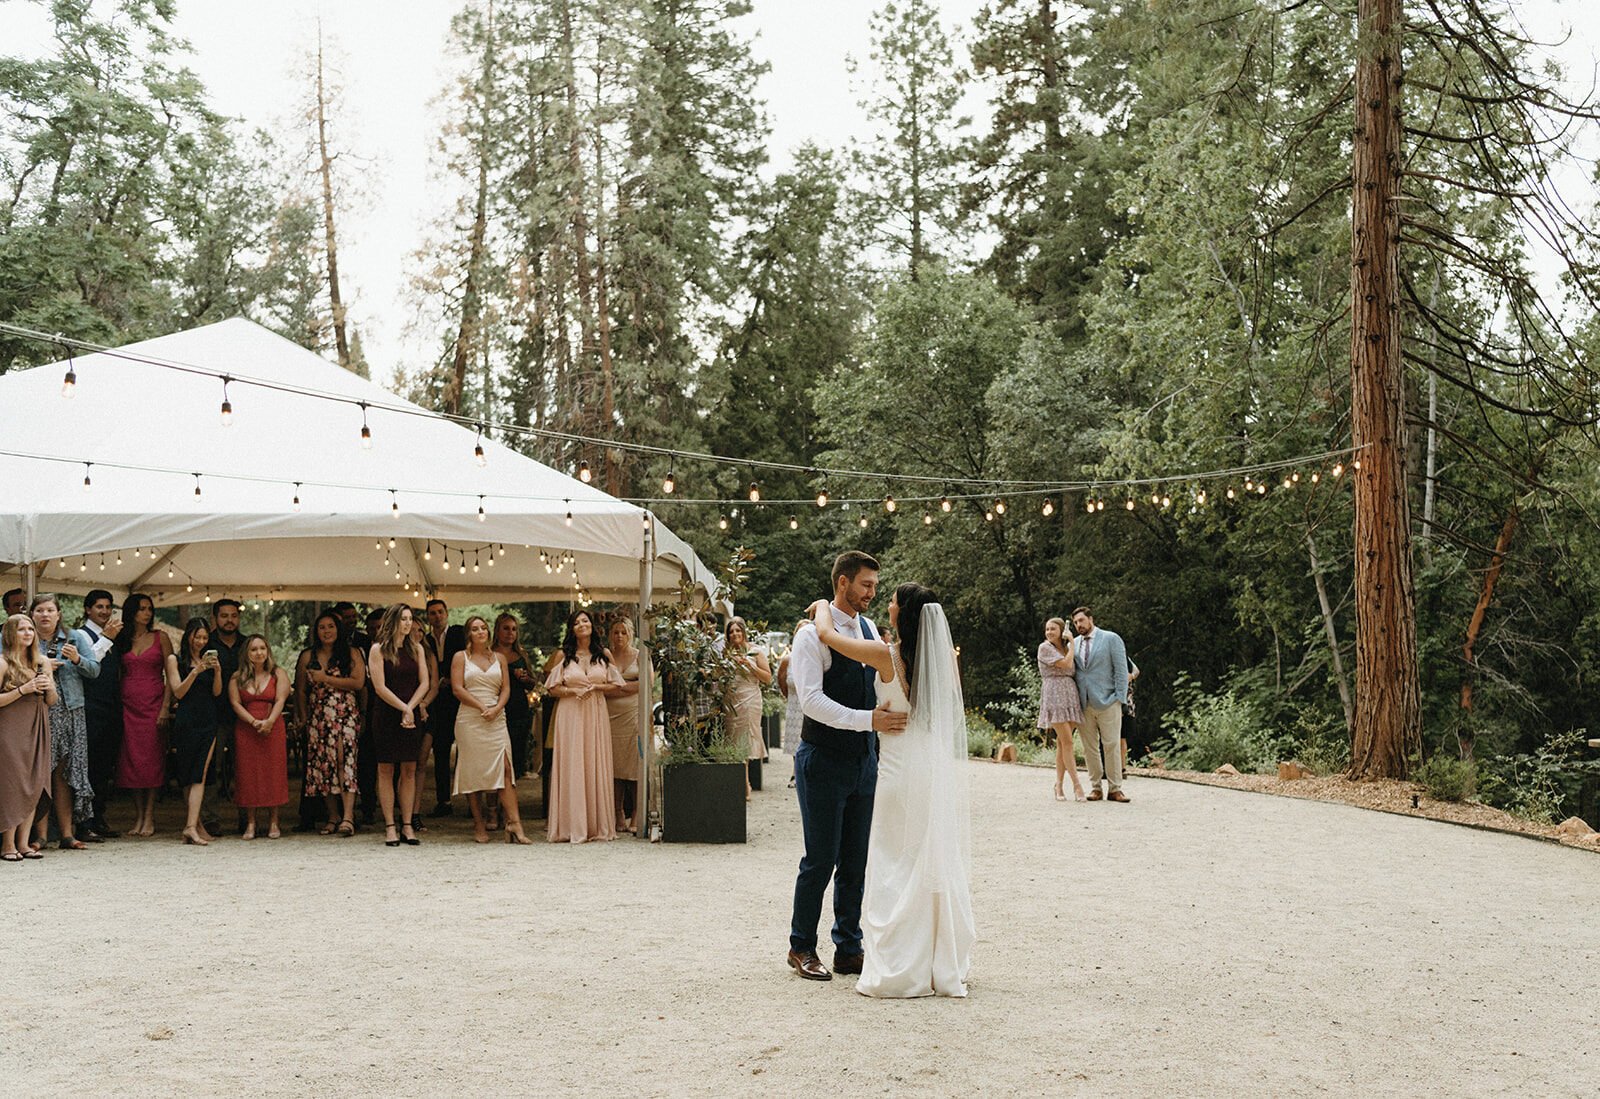 Meet me beneath the towering trees of Tahoe 🌿⁣
Photo: @amandaphotoco⁣⁣
Coordination: @clehouse.co